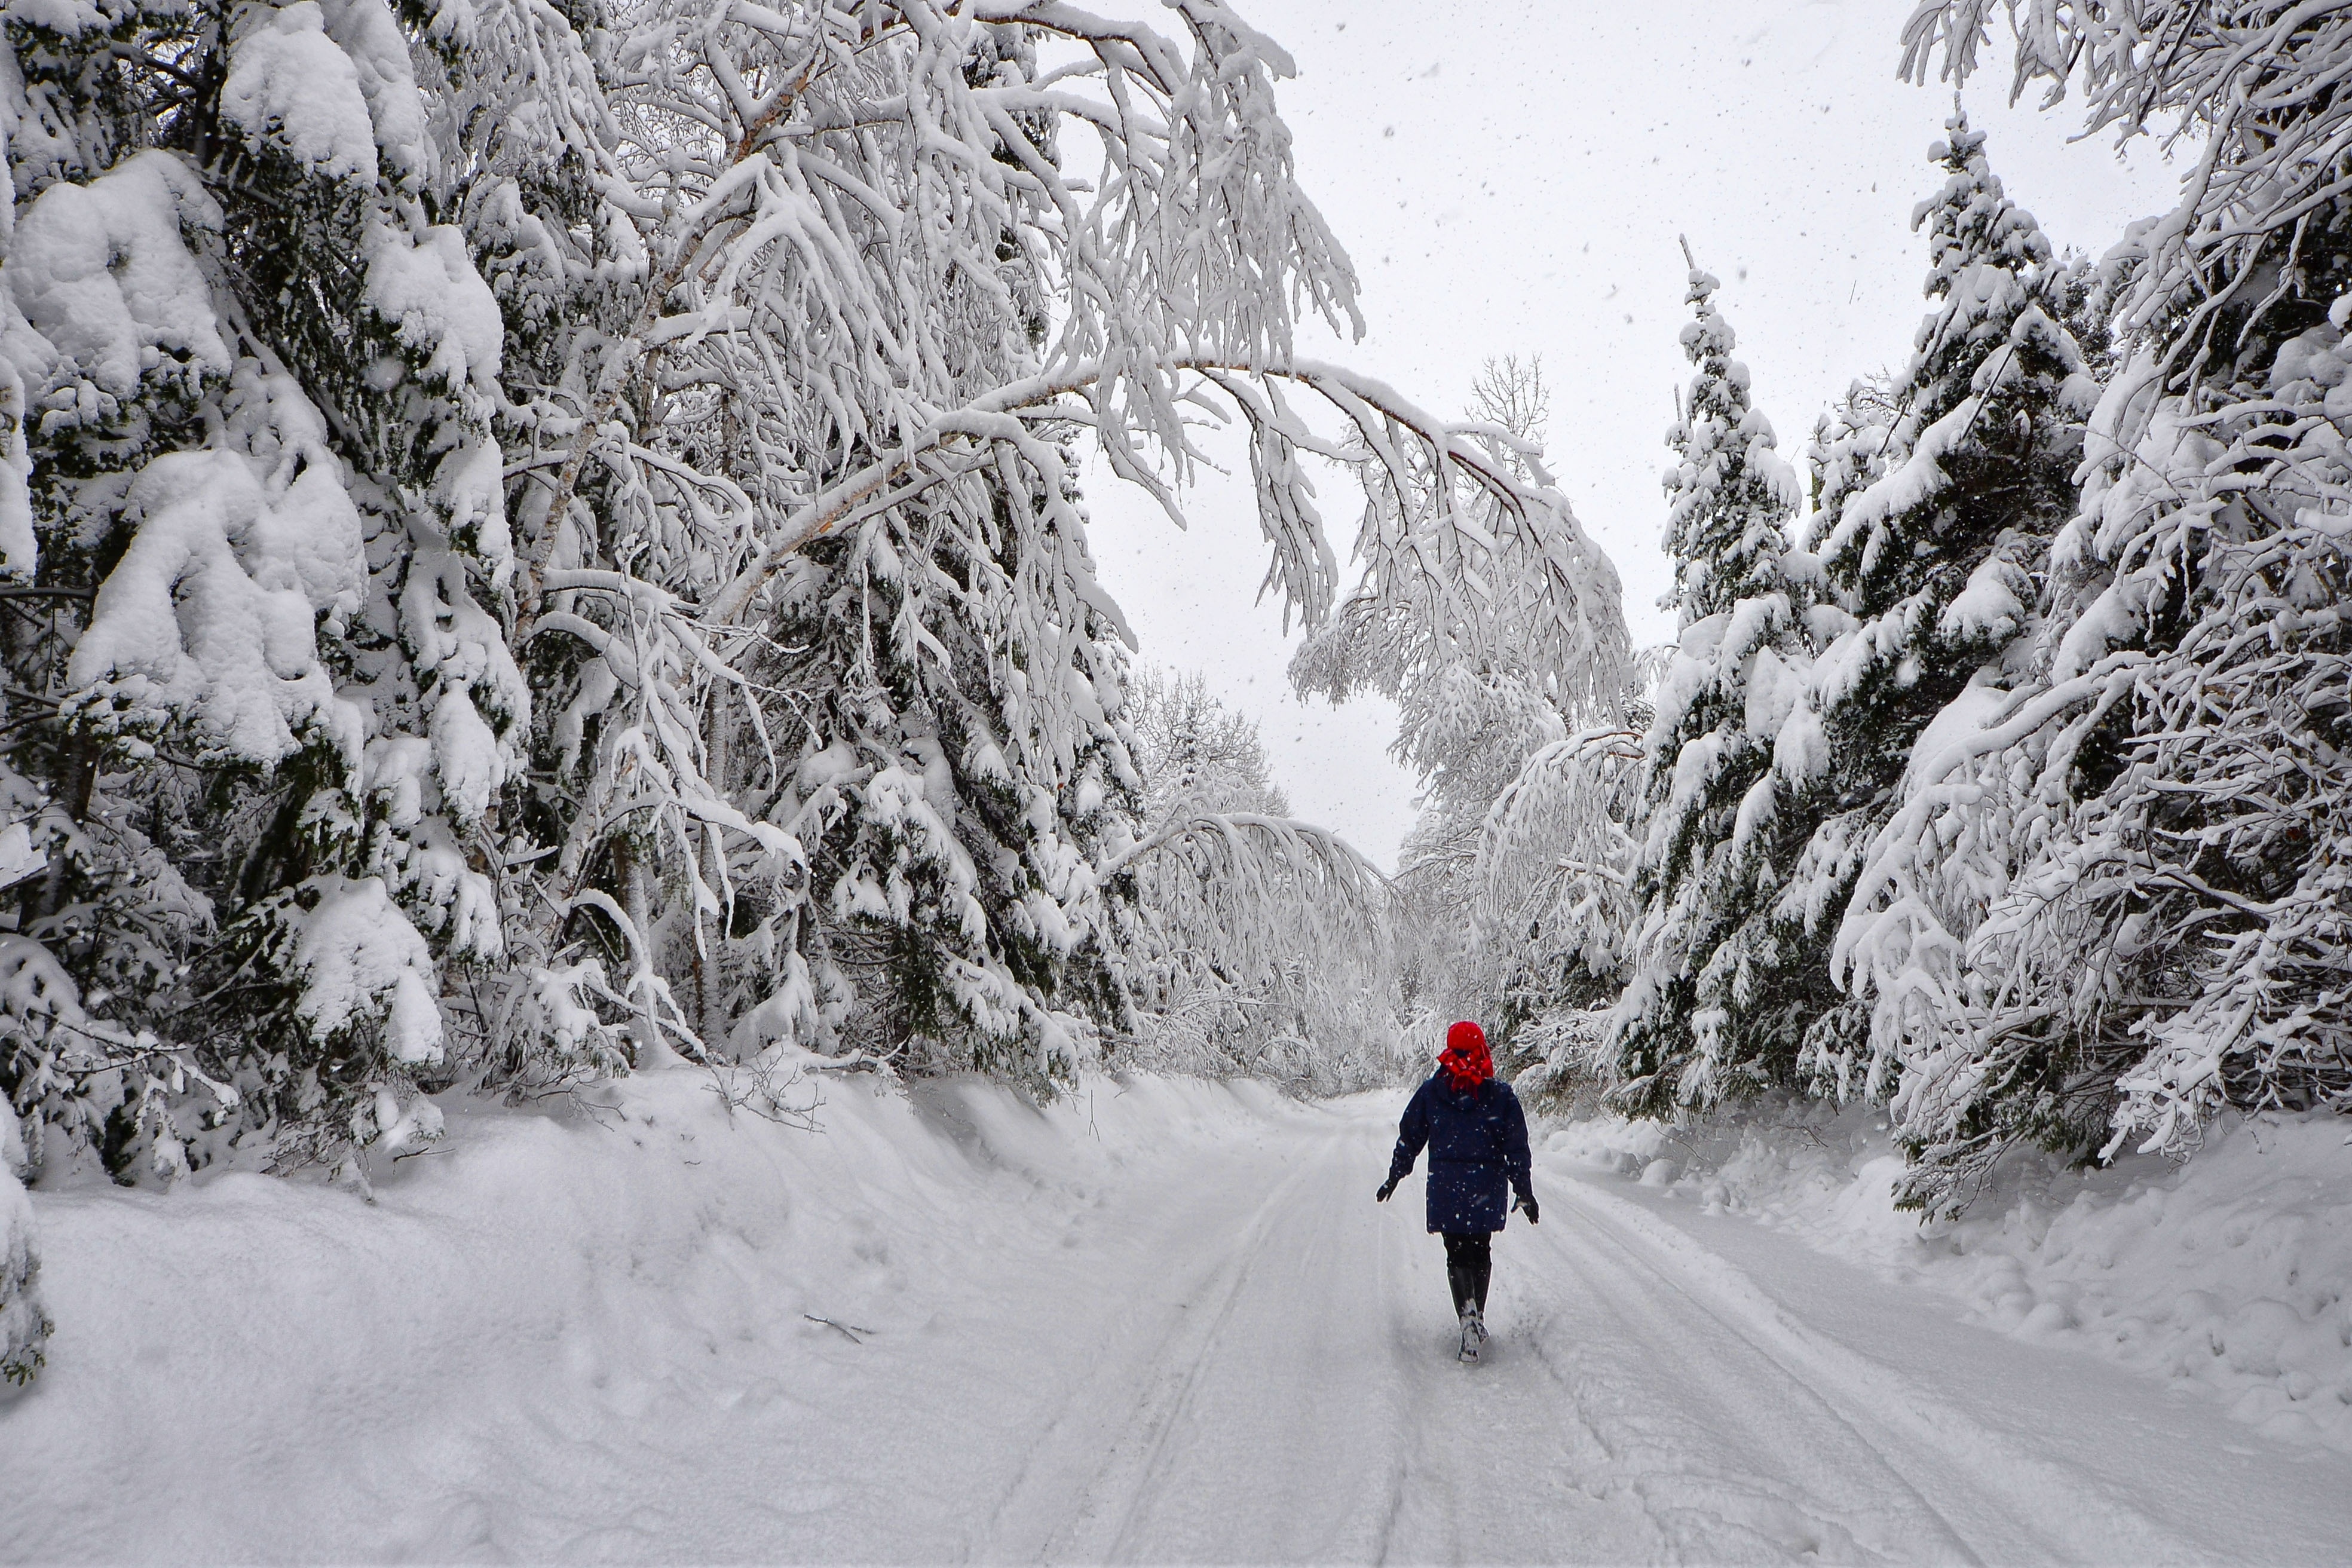 road with thick snow and thick pine trees on both sides